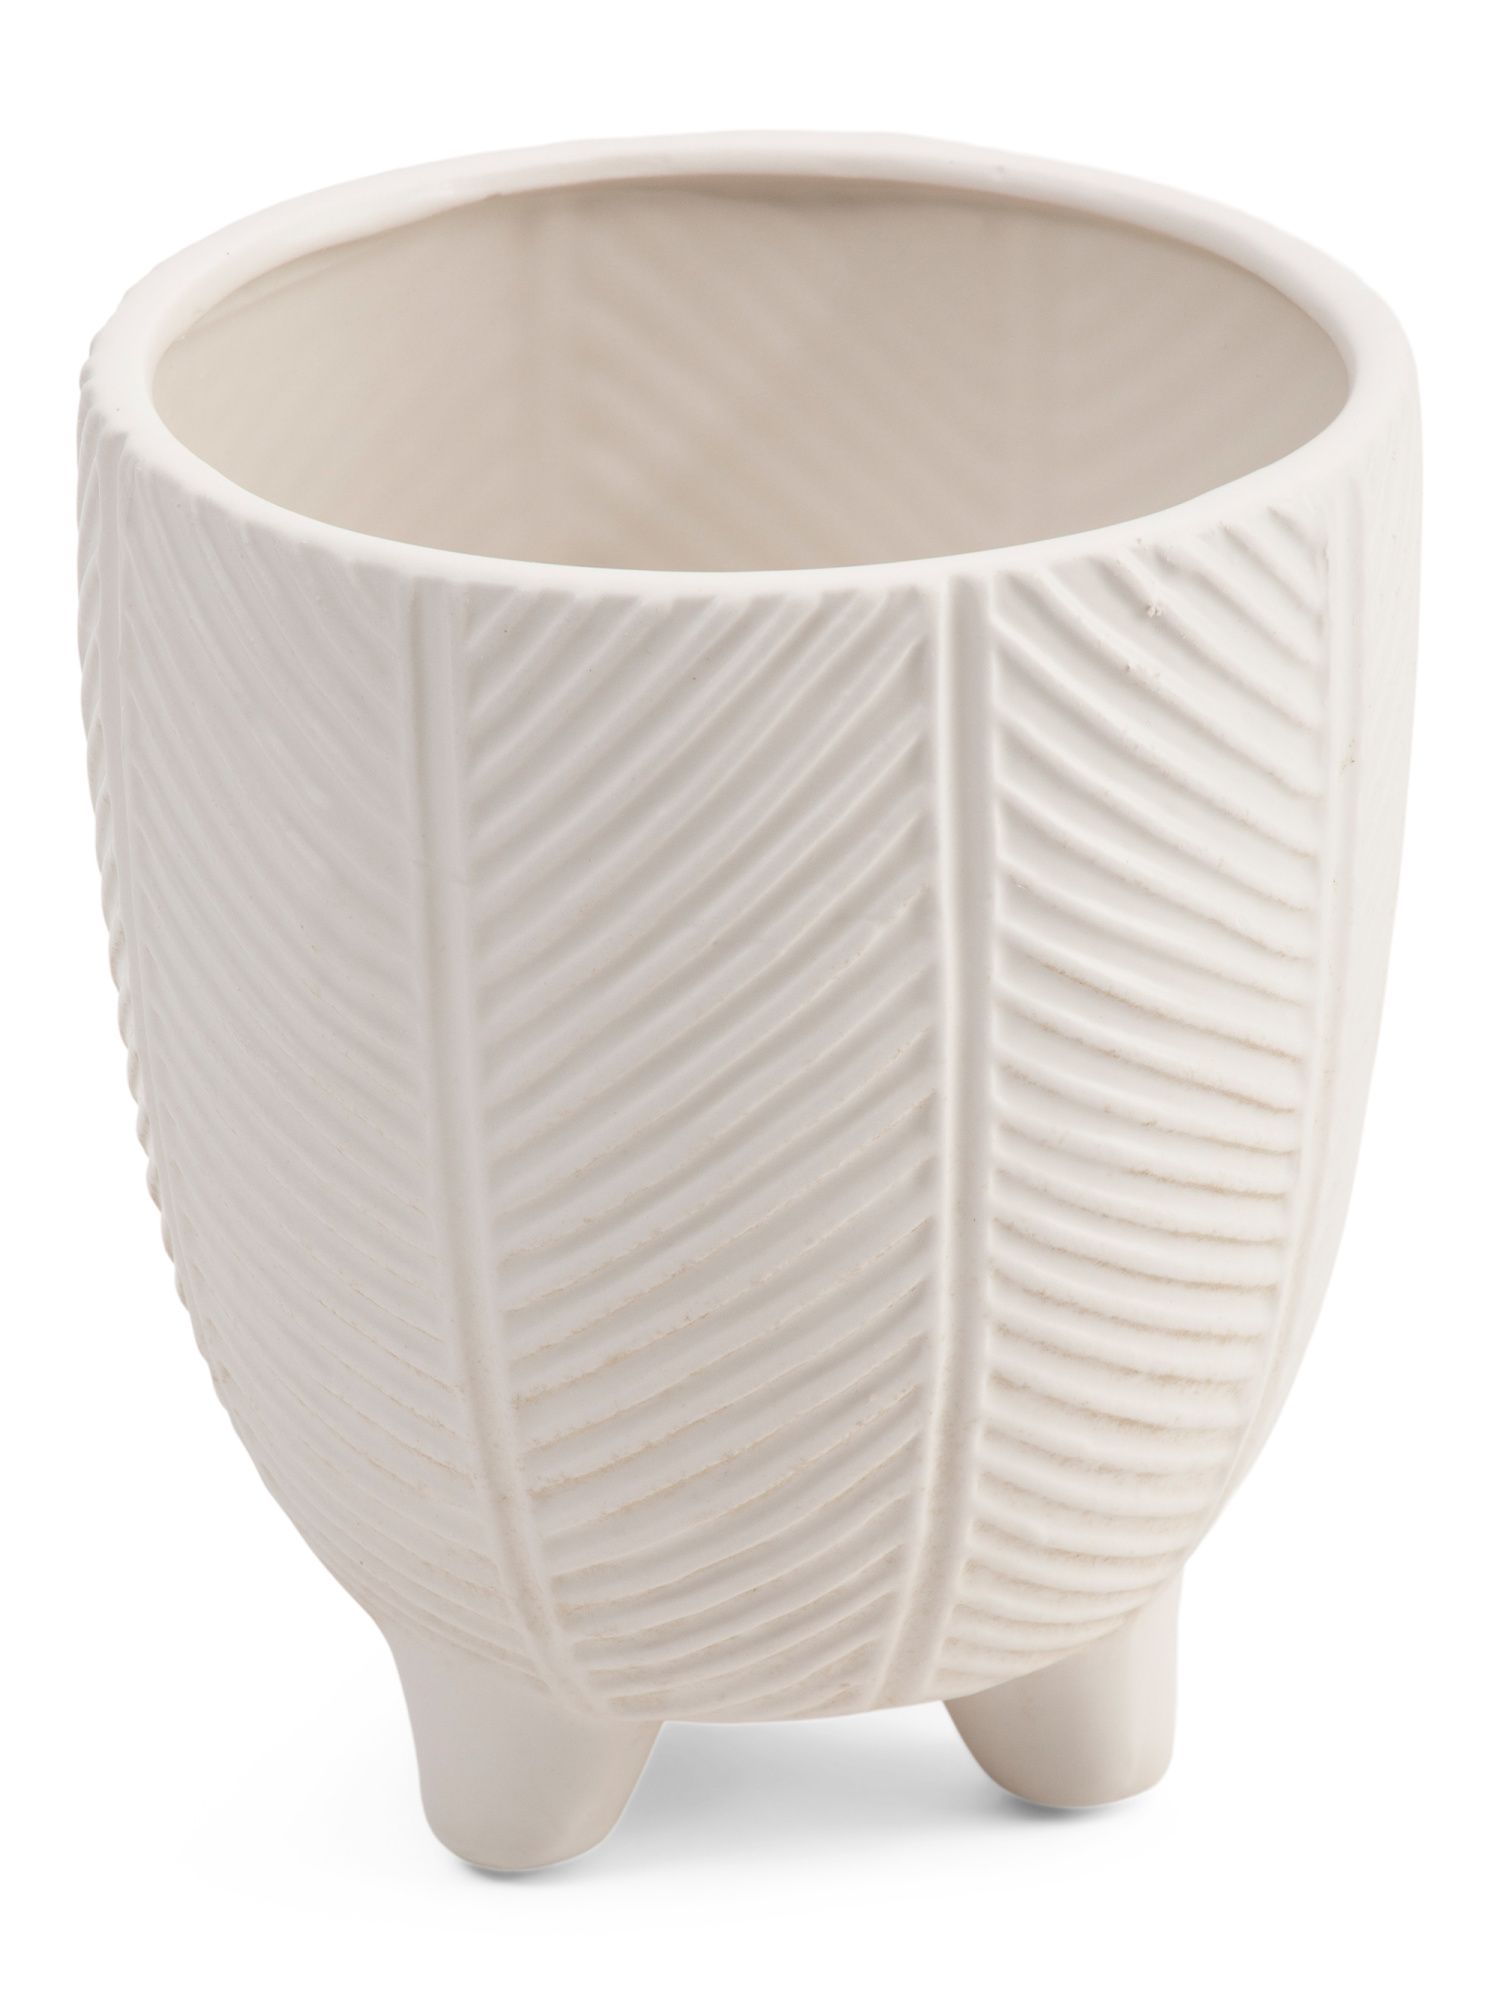 6in Porcelain Footed Planter | Marshalls